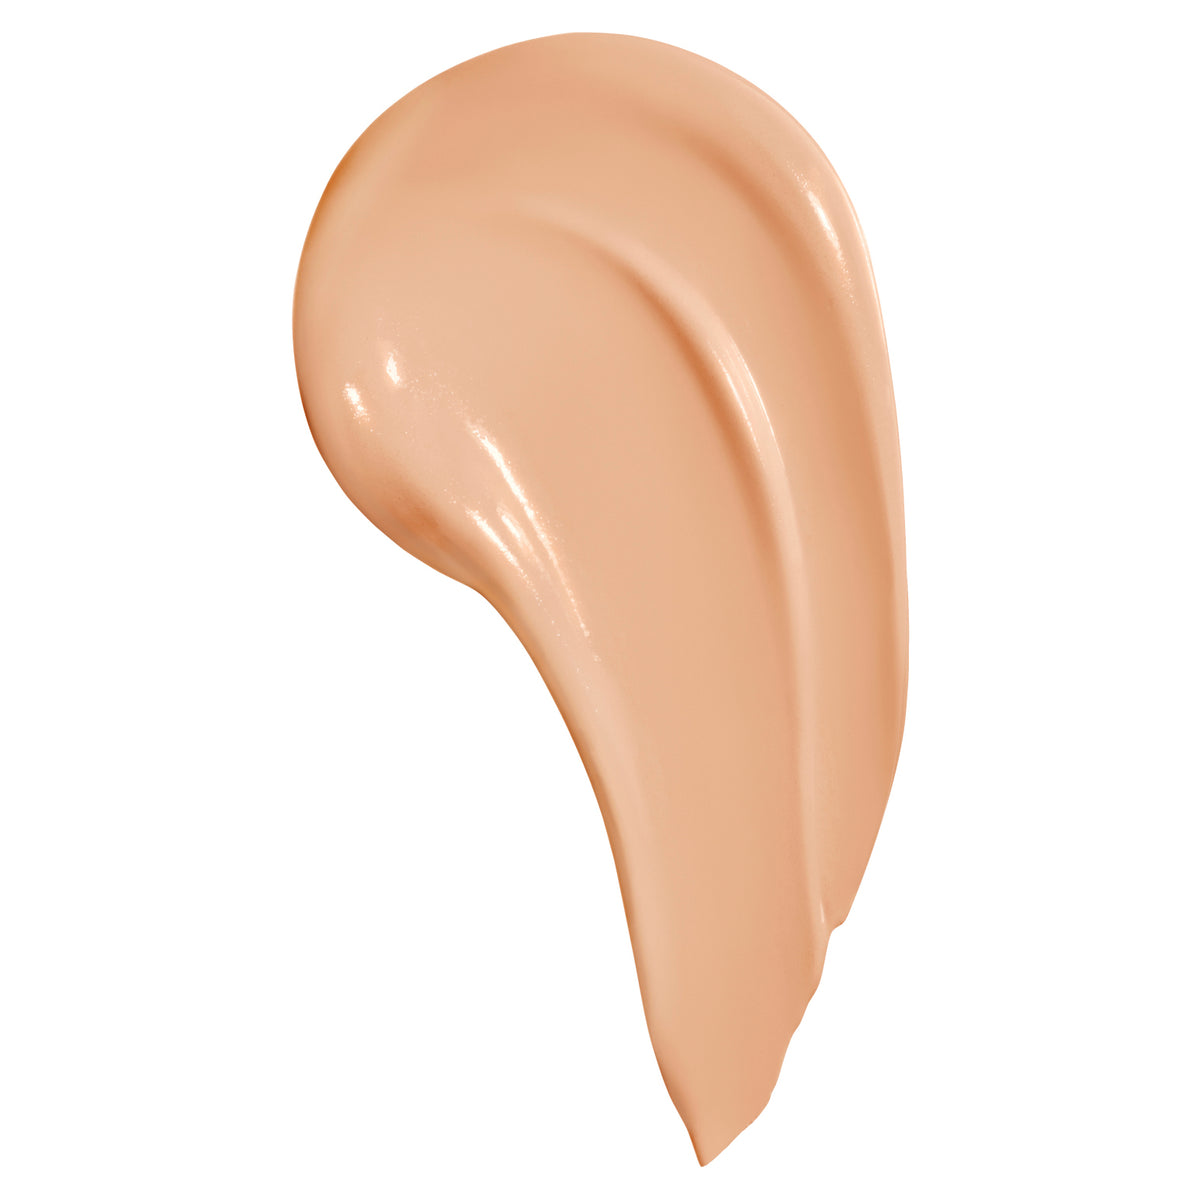 MAYBELLINE SuperStay 30H Activewear Foundation - Sand #30